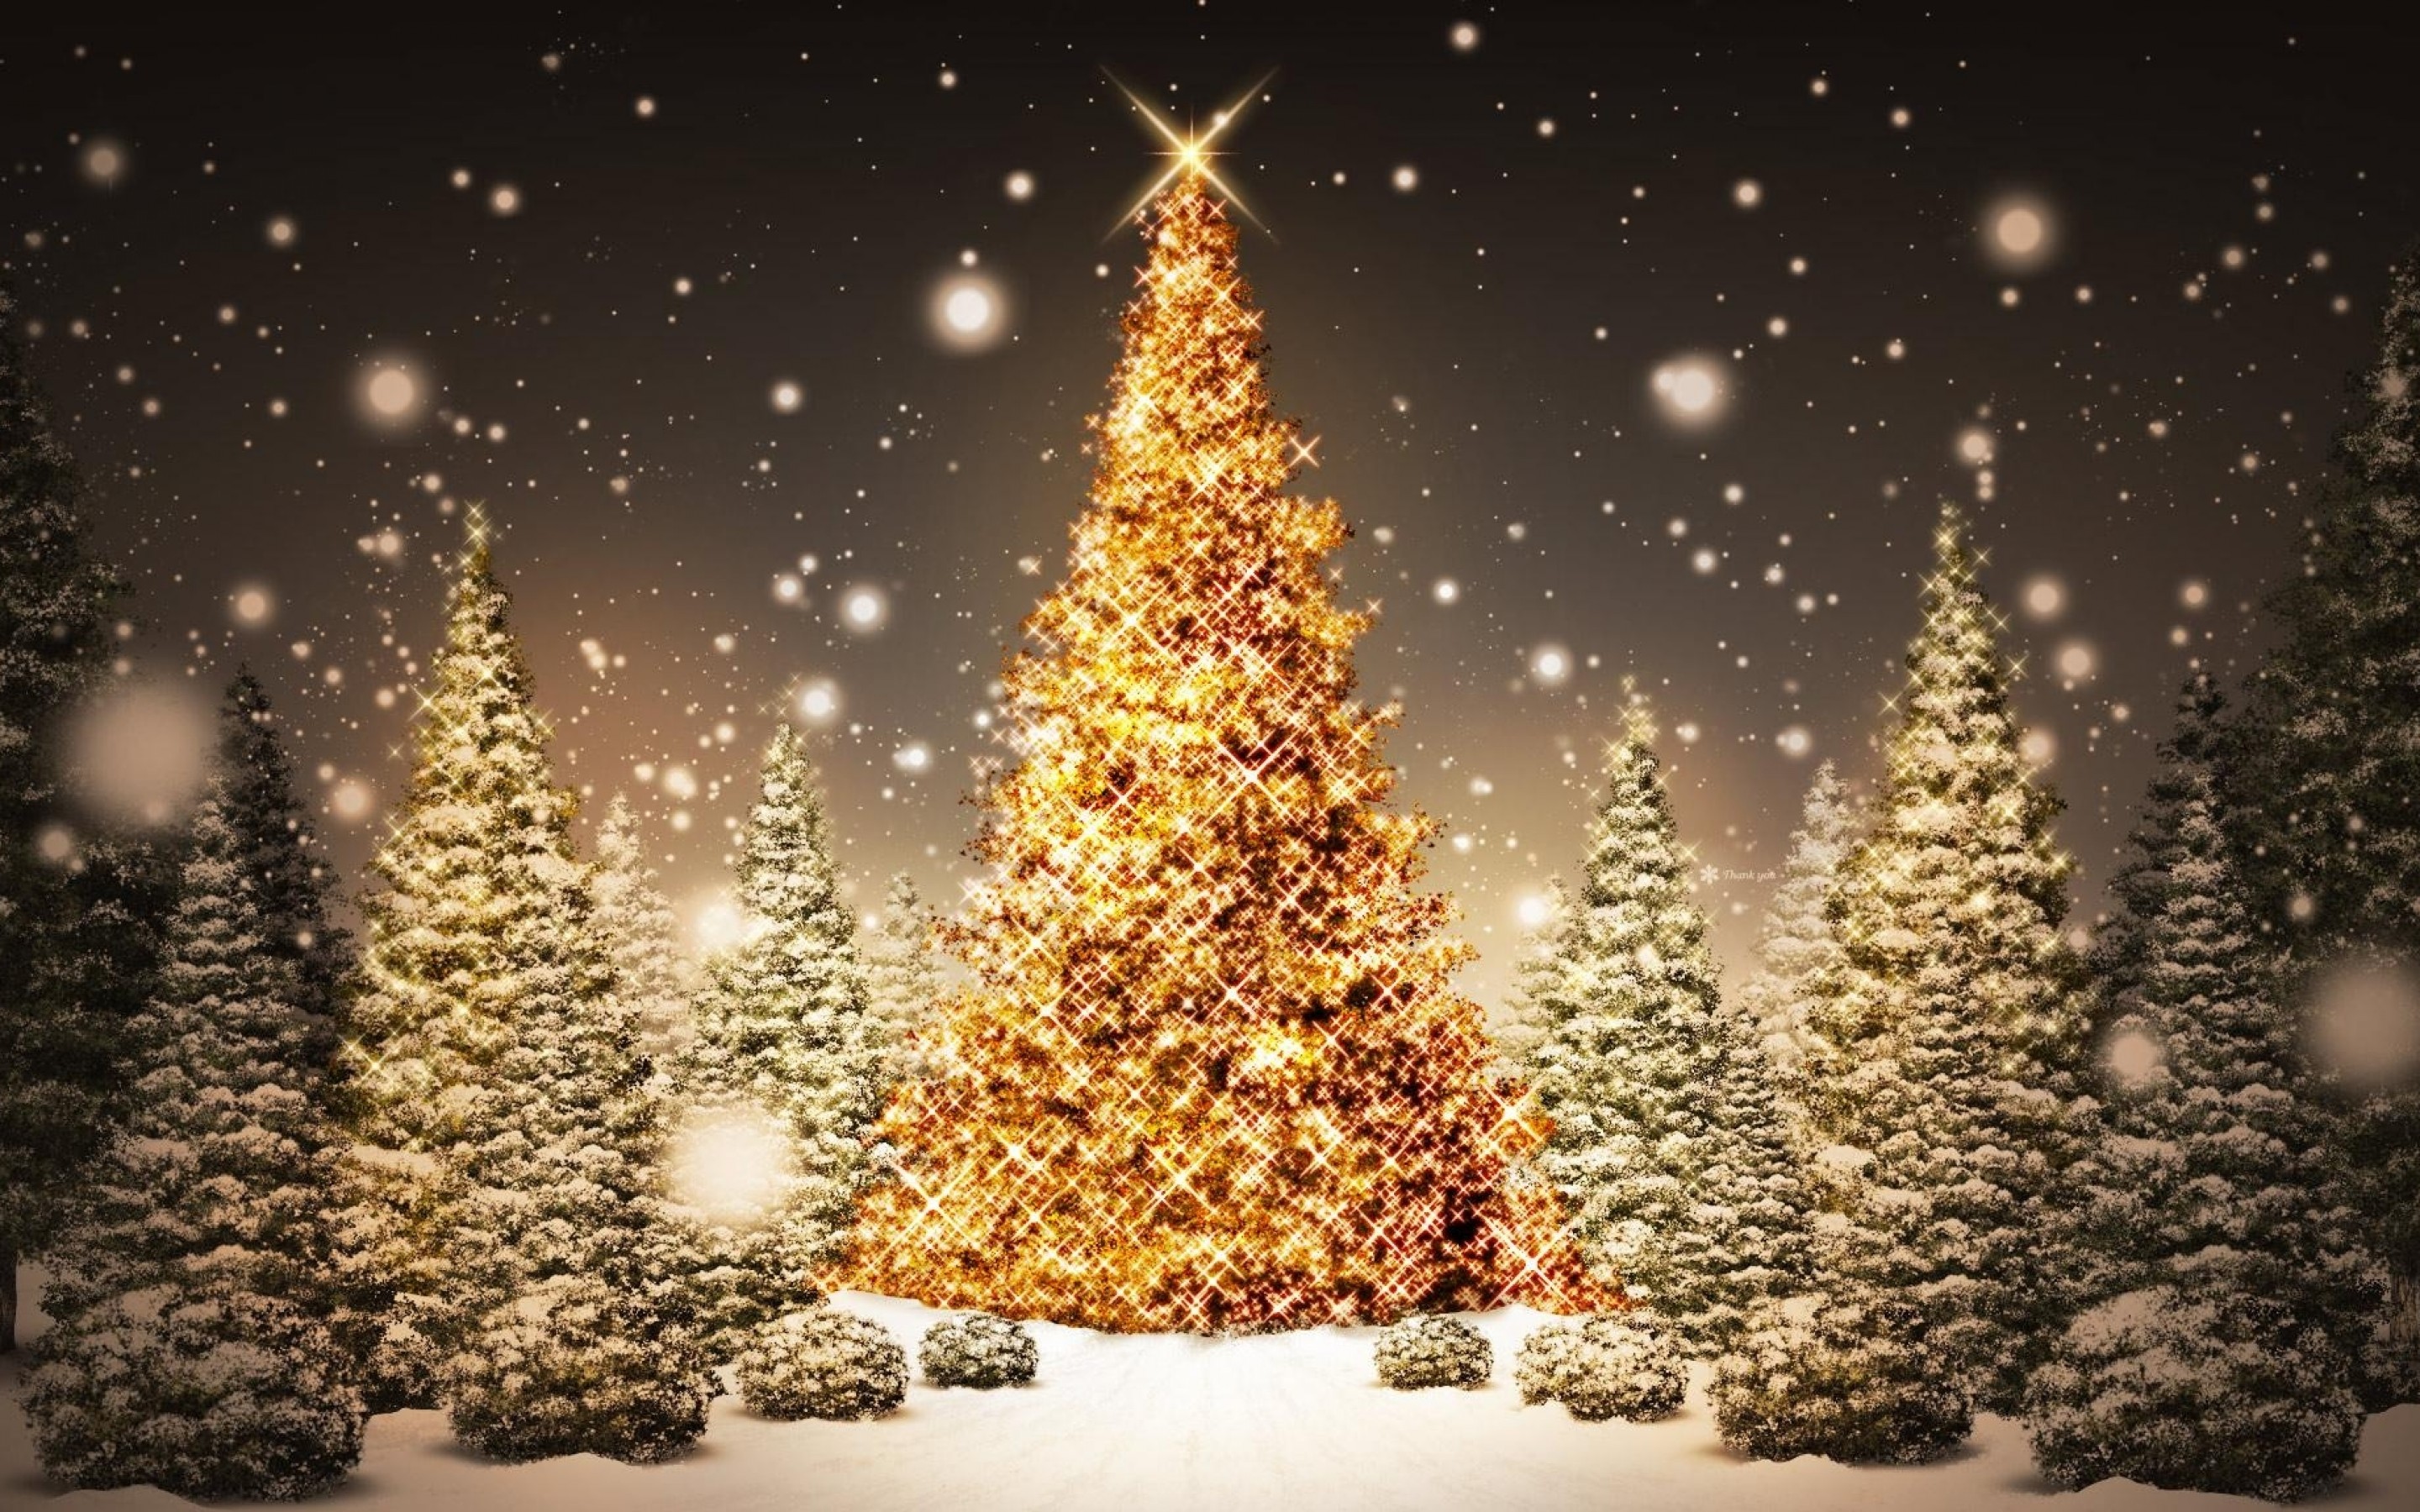 Awesome Christmas Tree And Star Picture Image HD Wallpaper